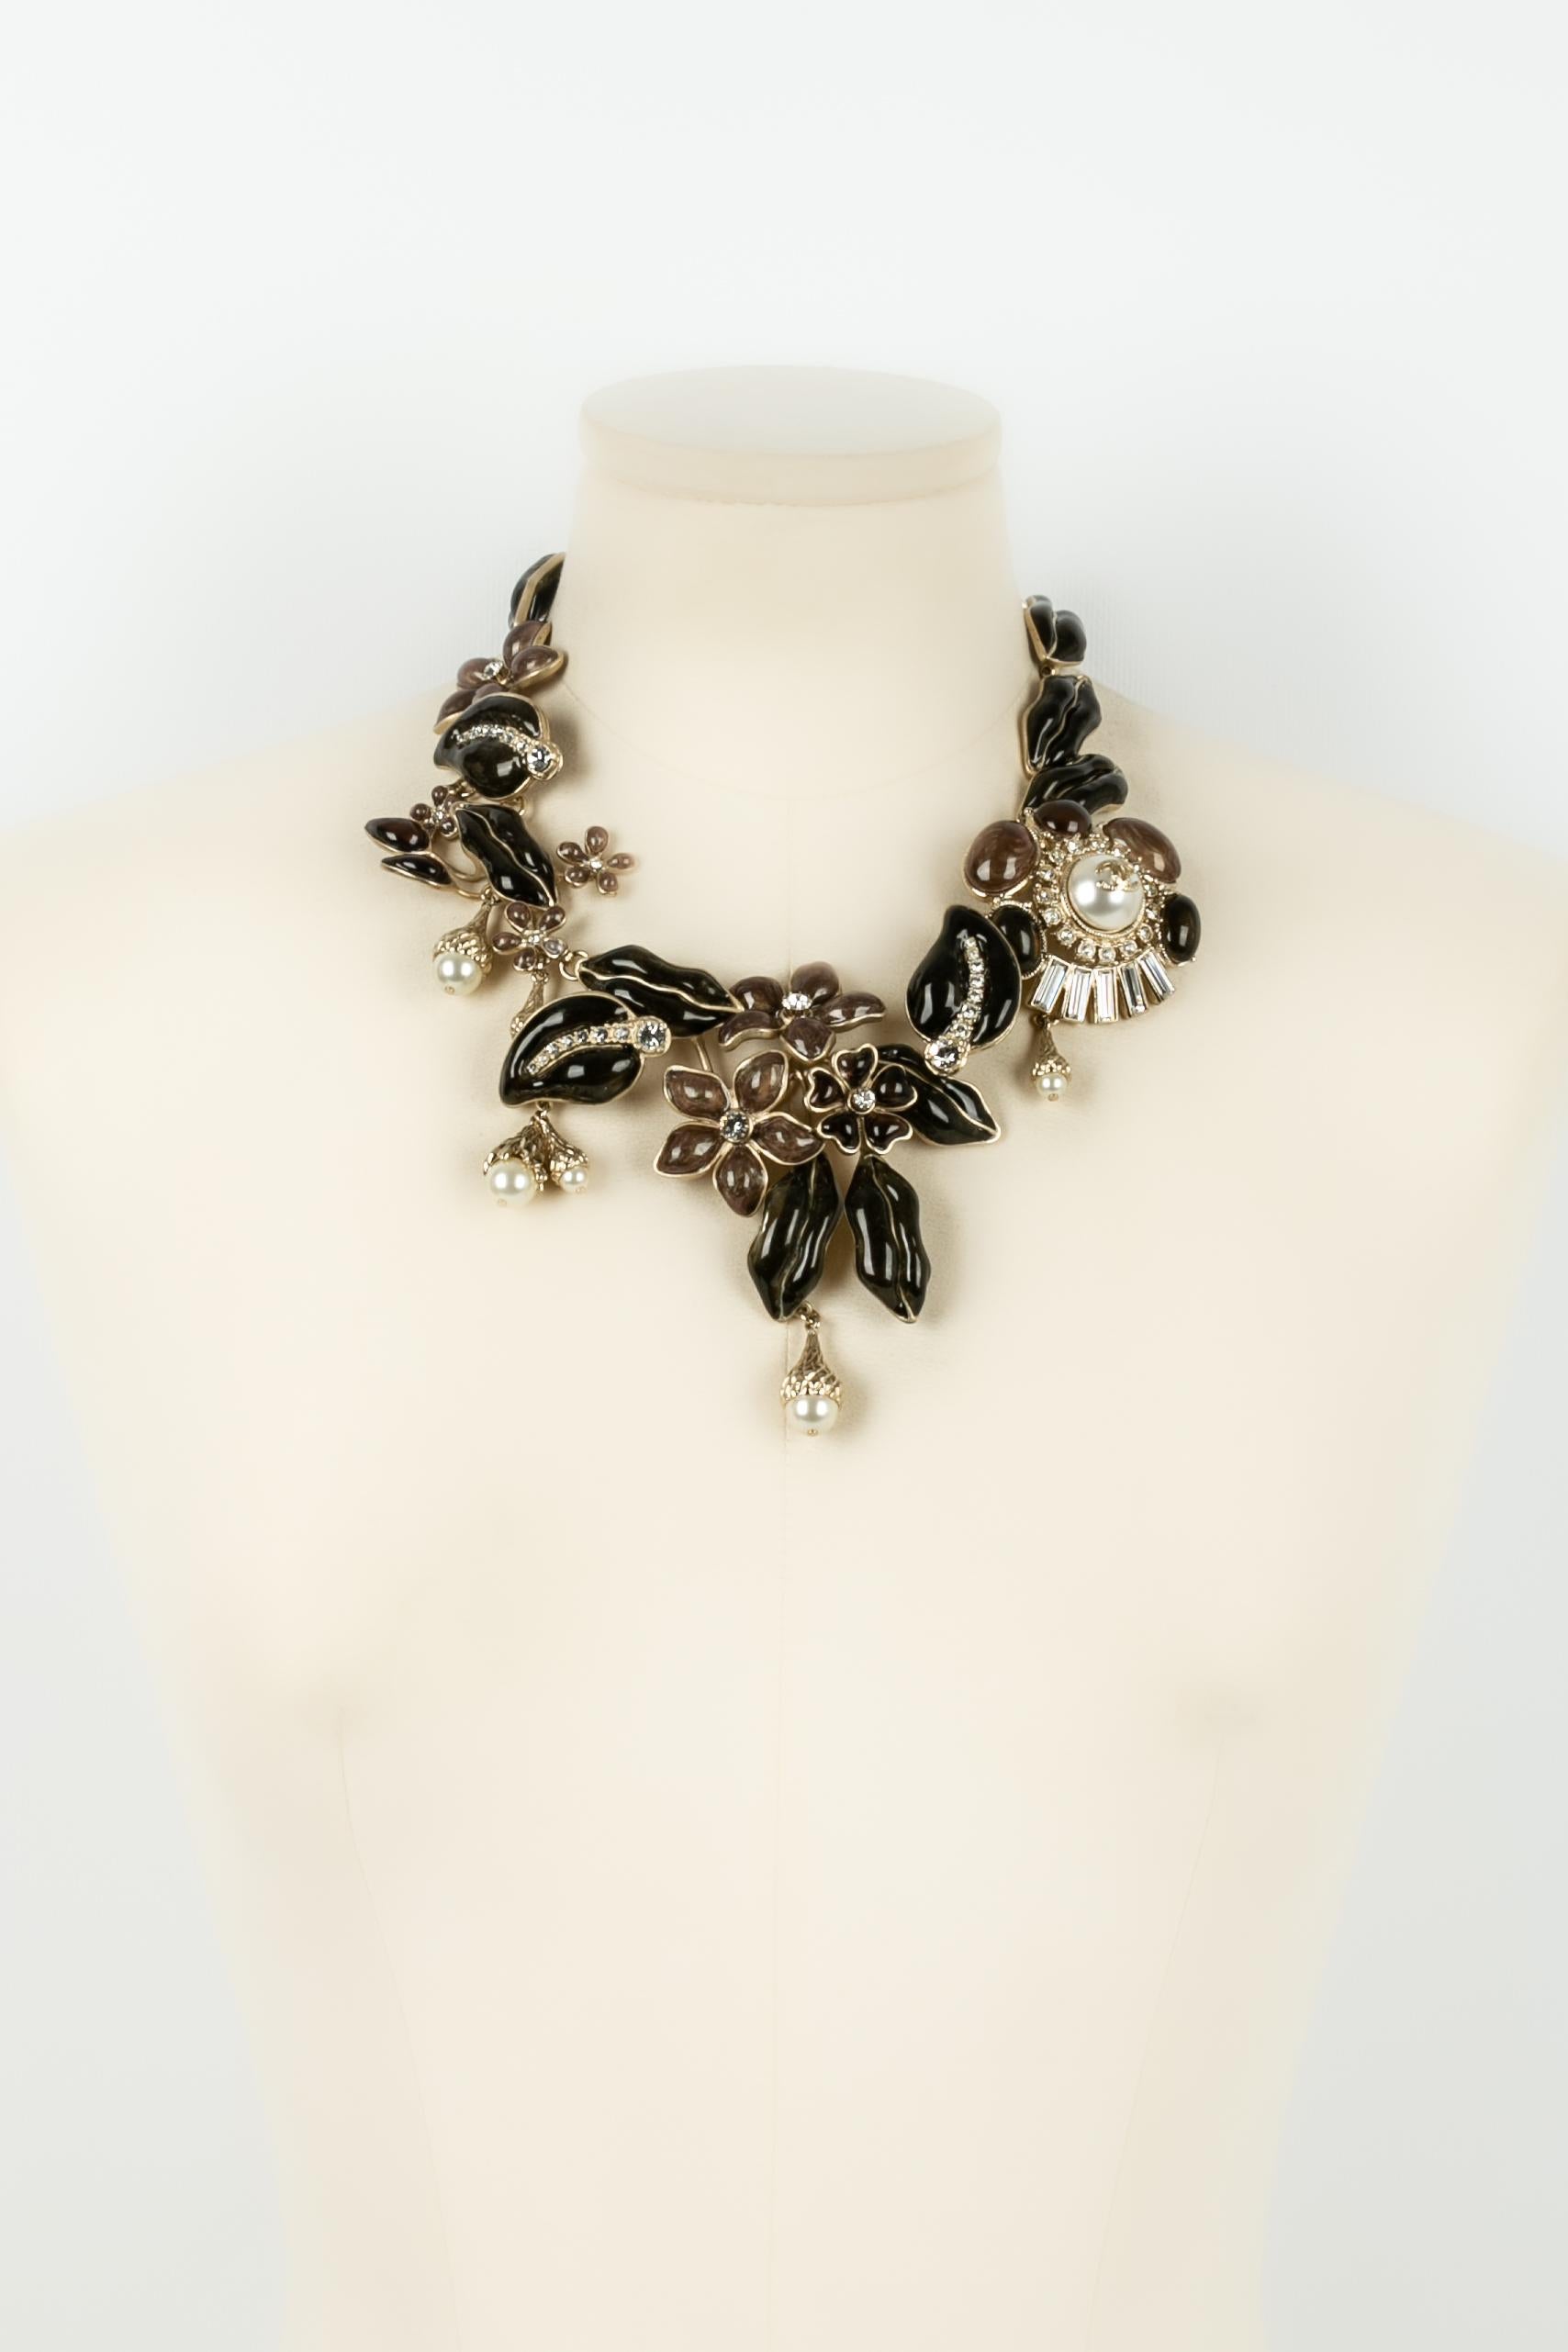 CHANEL - (Made in France) Necklace in champagne metal, resin, rhinestones and fancy pearls. Fall-Winter 2011 collection.

Condition:
Very good condition

Dimensions:
Length : from 41 cm to 43,5 cm